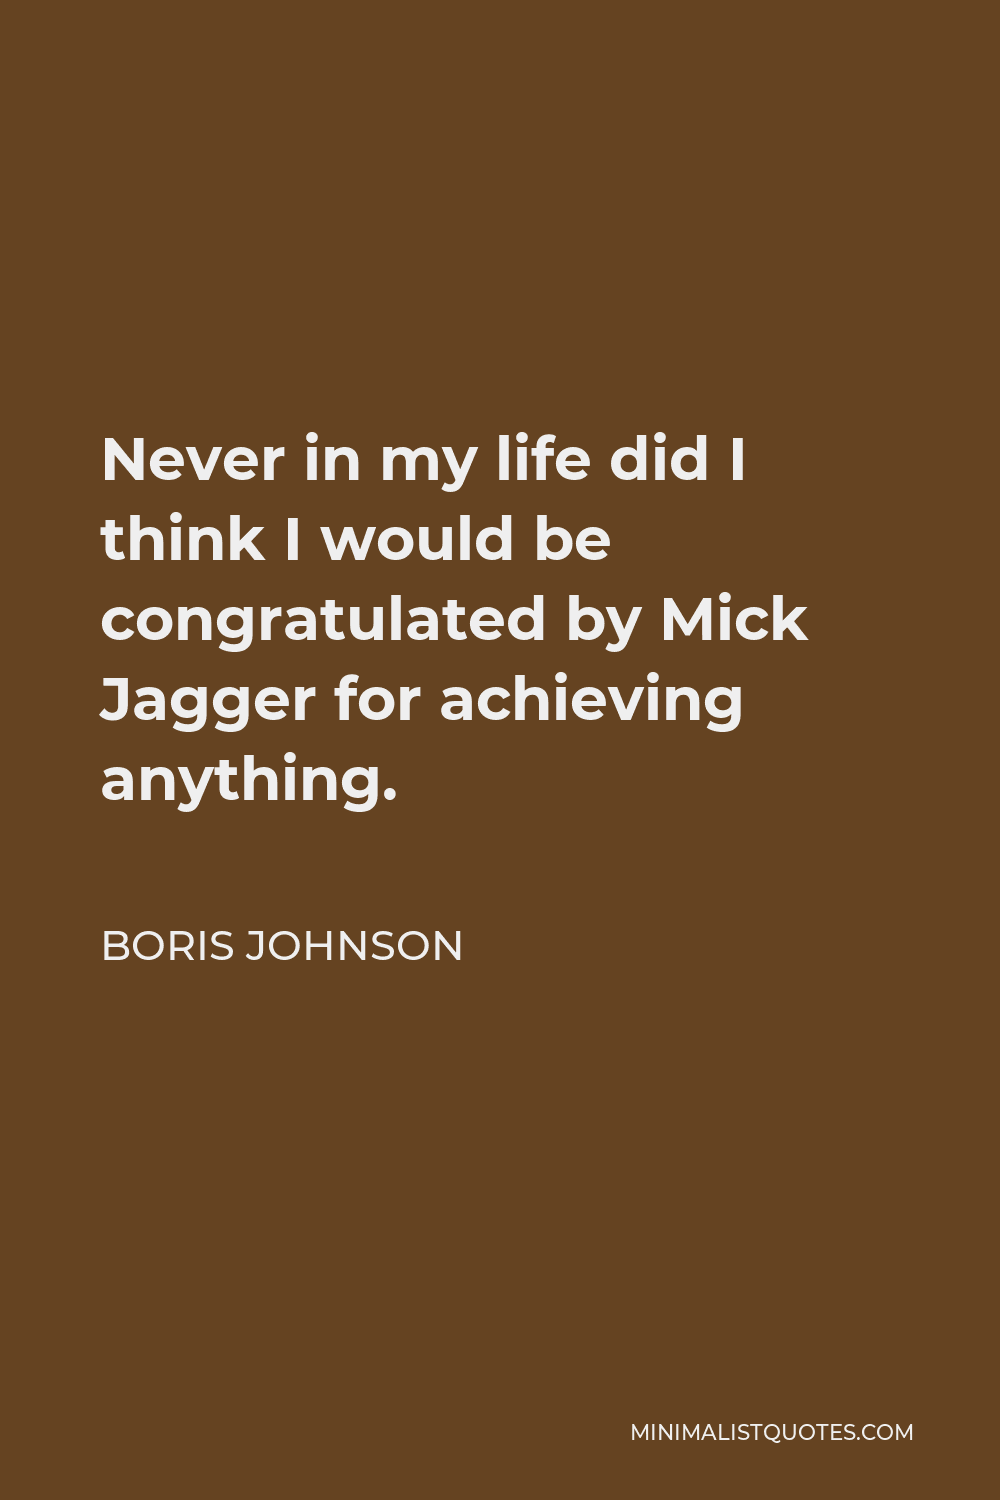 Boris Johnson Quote - Never in my life did I think I would be congratulated by Mick Jagger for achieving anything.